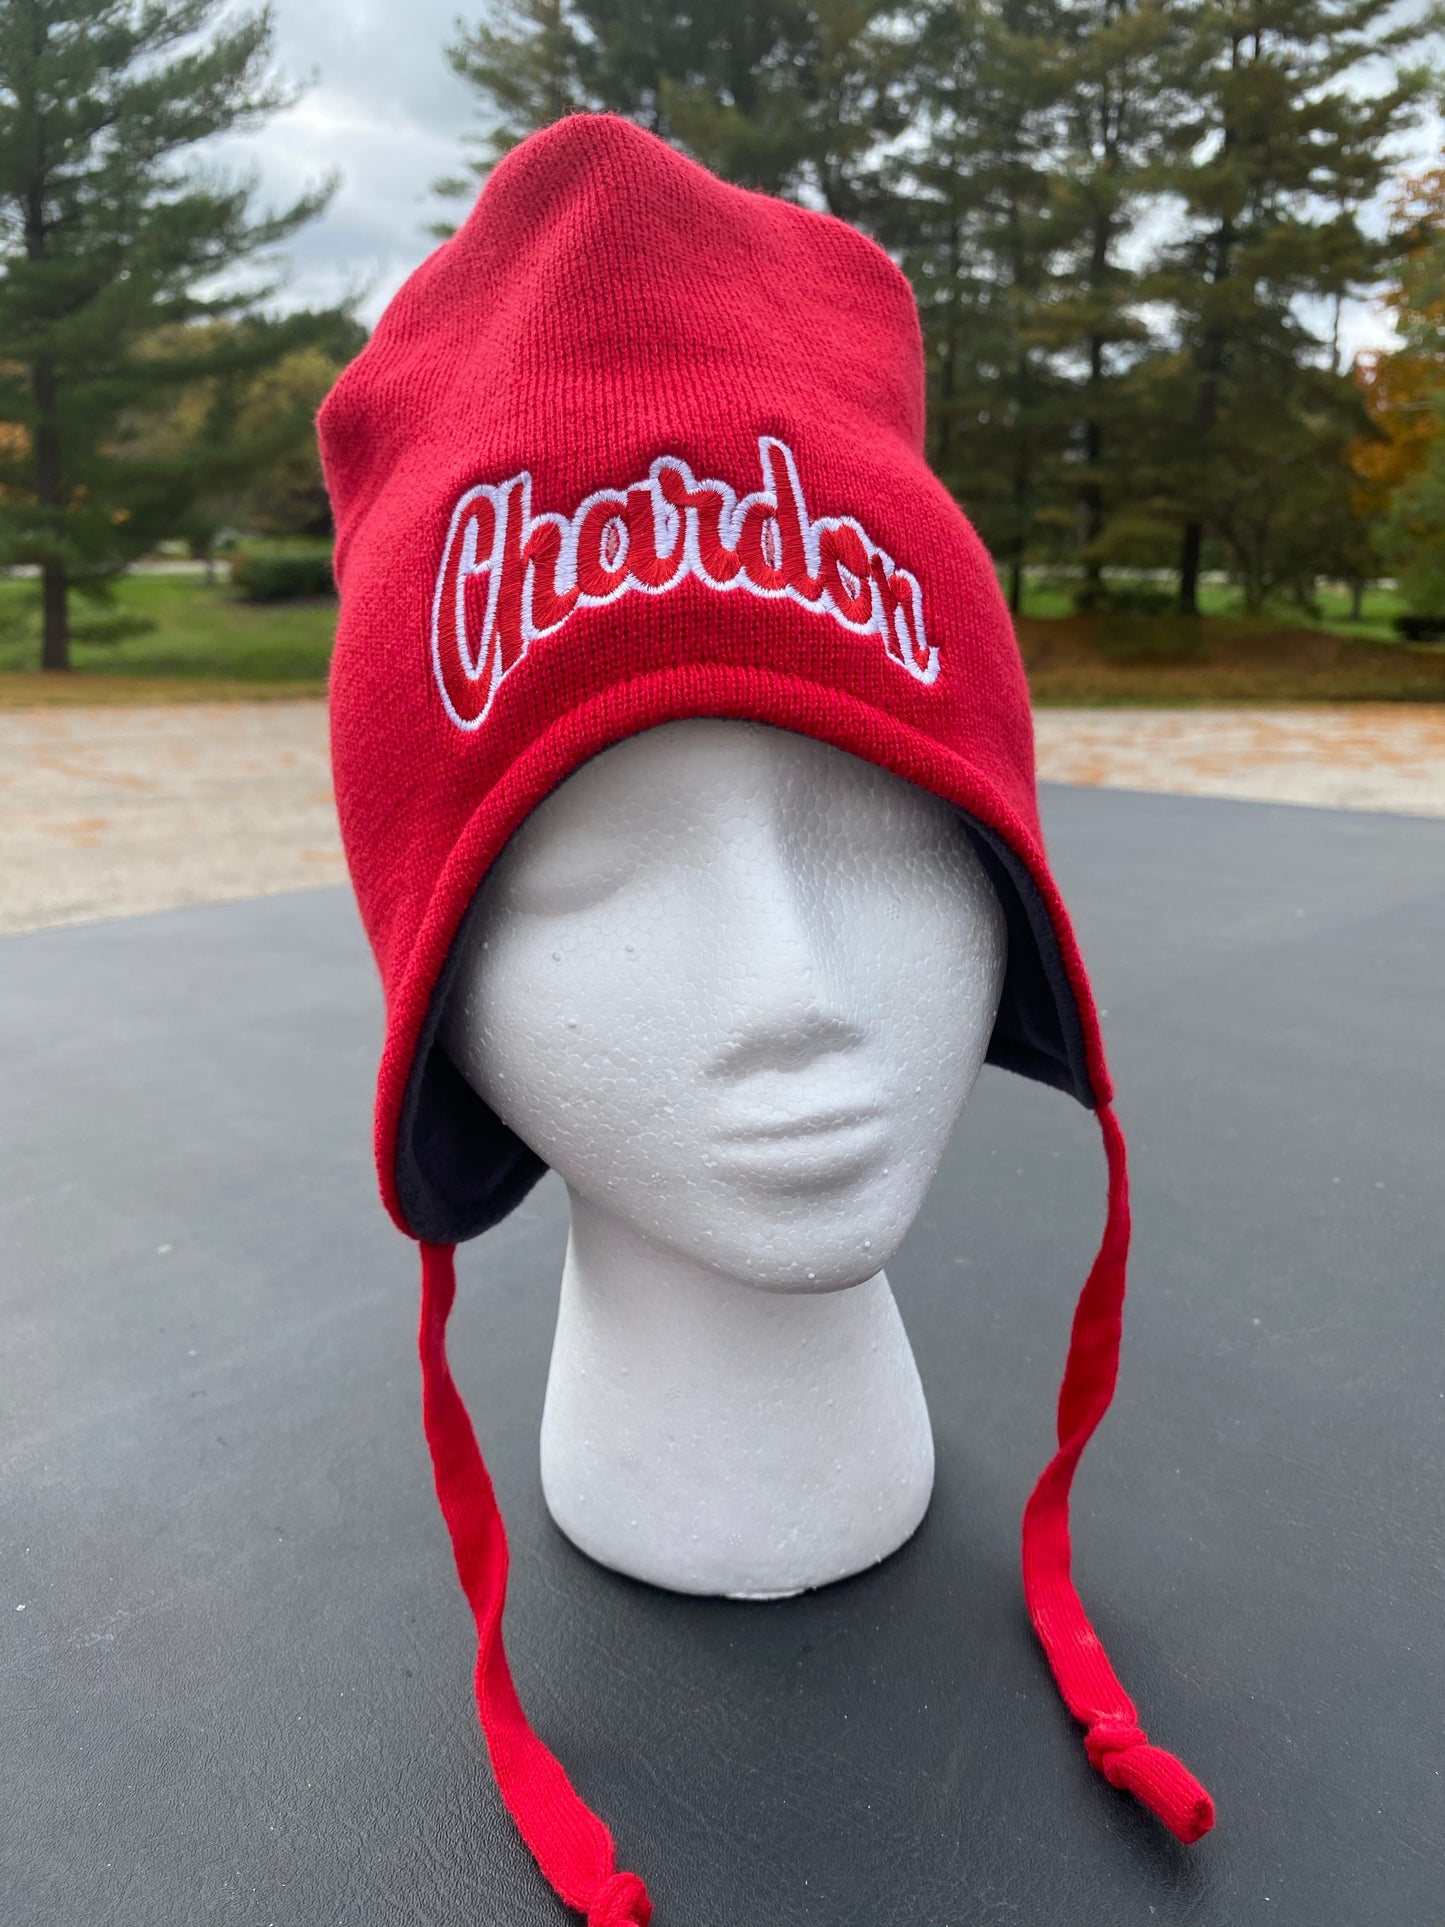 Embroidered Red Richardson Snow Hat with Chardon Logo